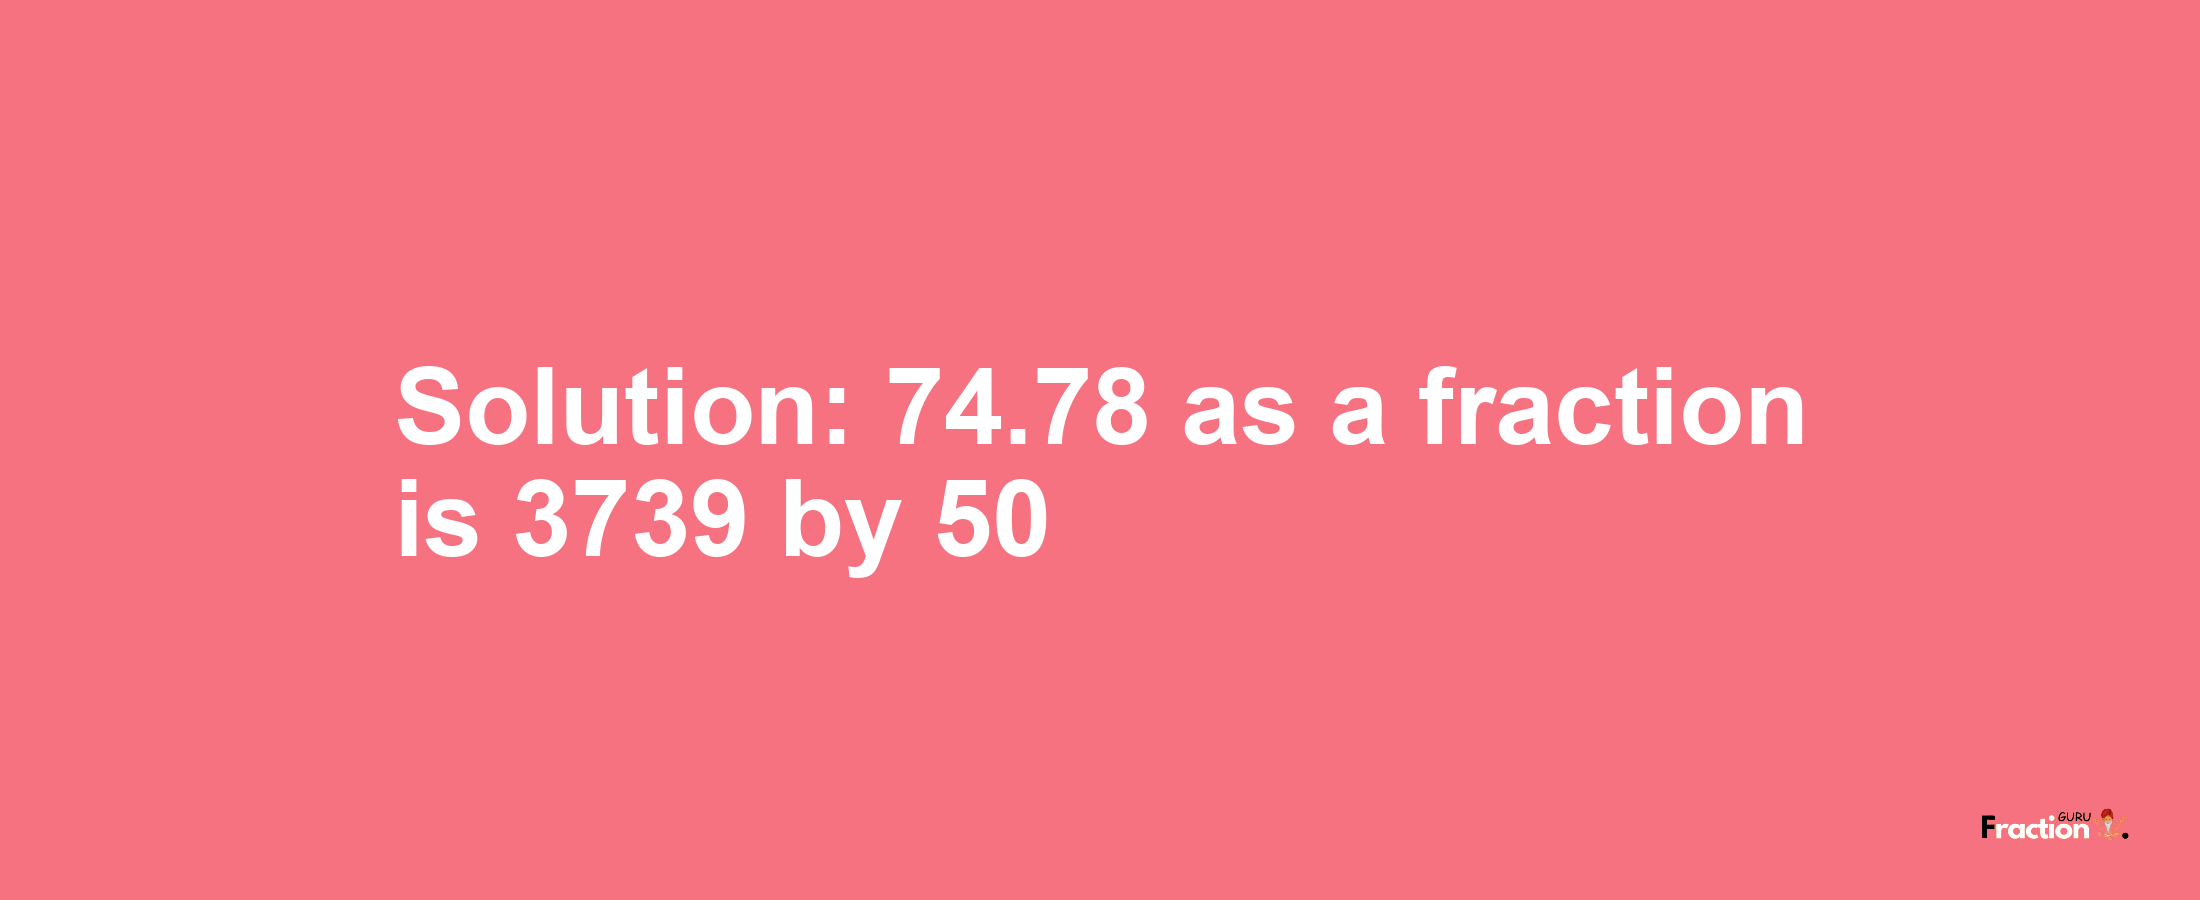 Solution:74.78 as a fraction is 3739/50